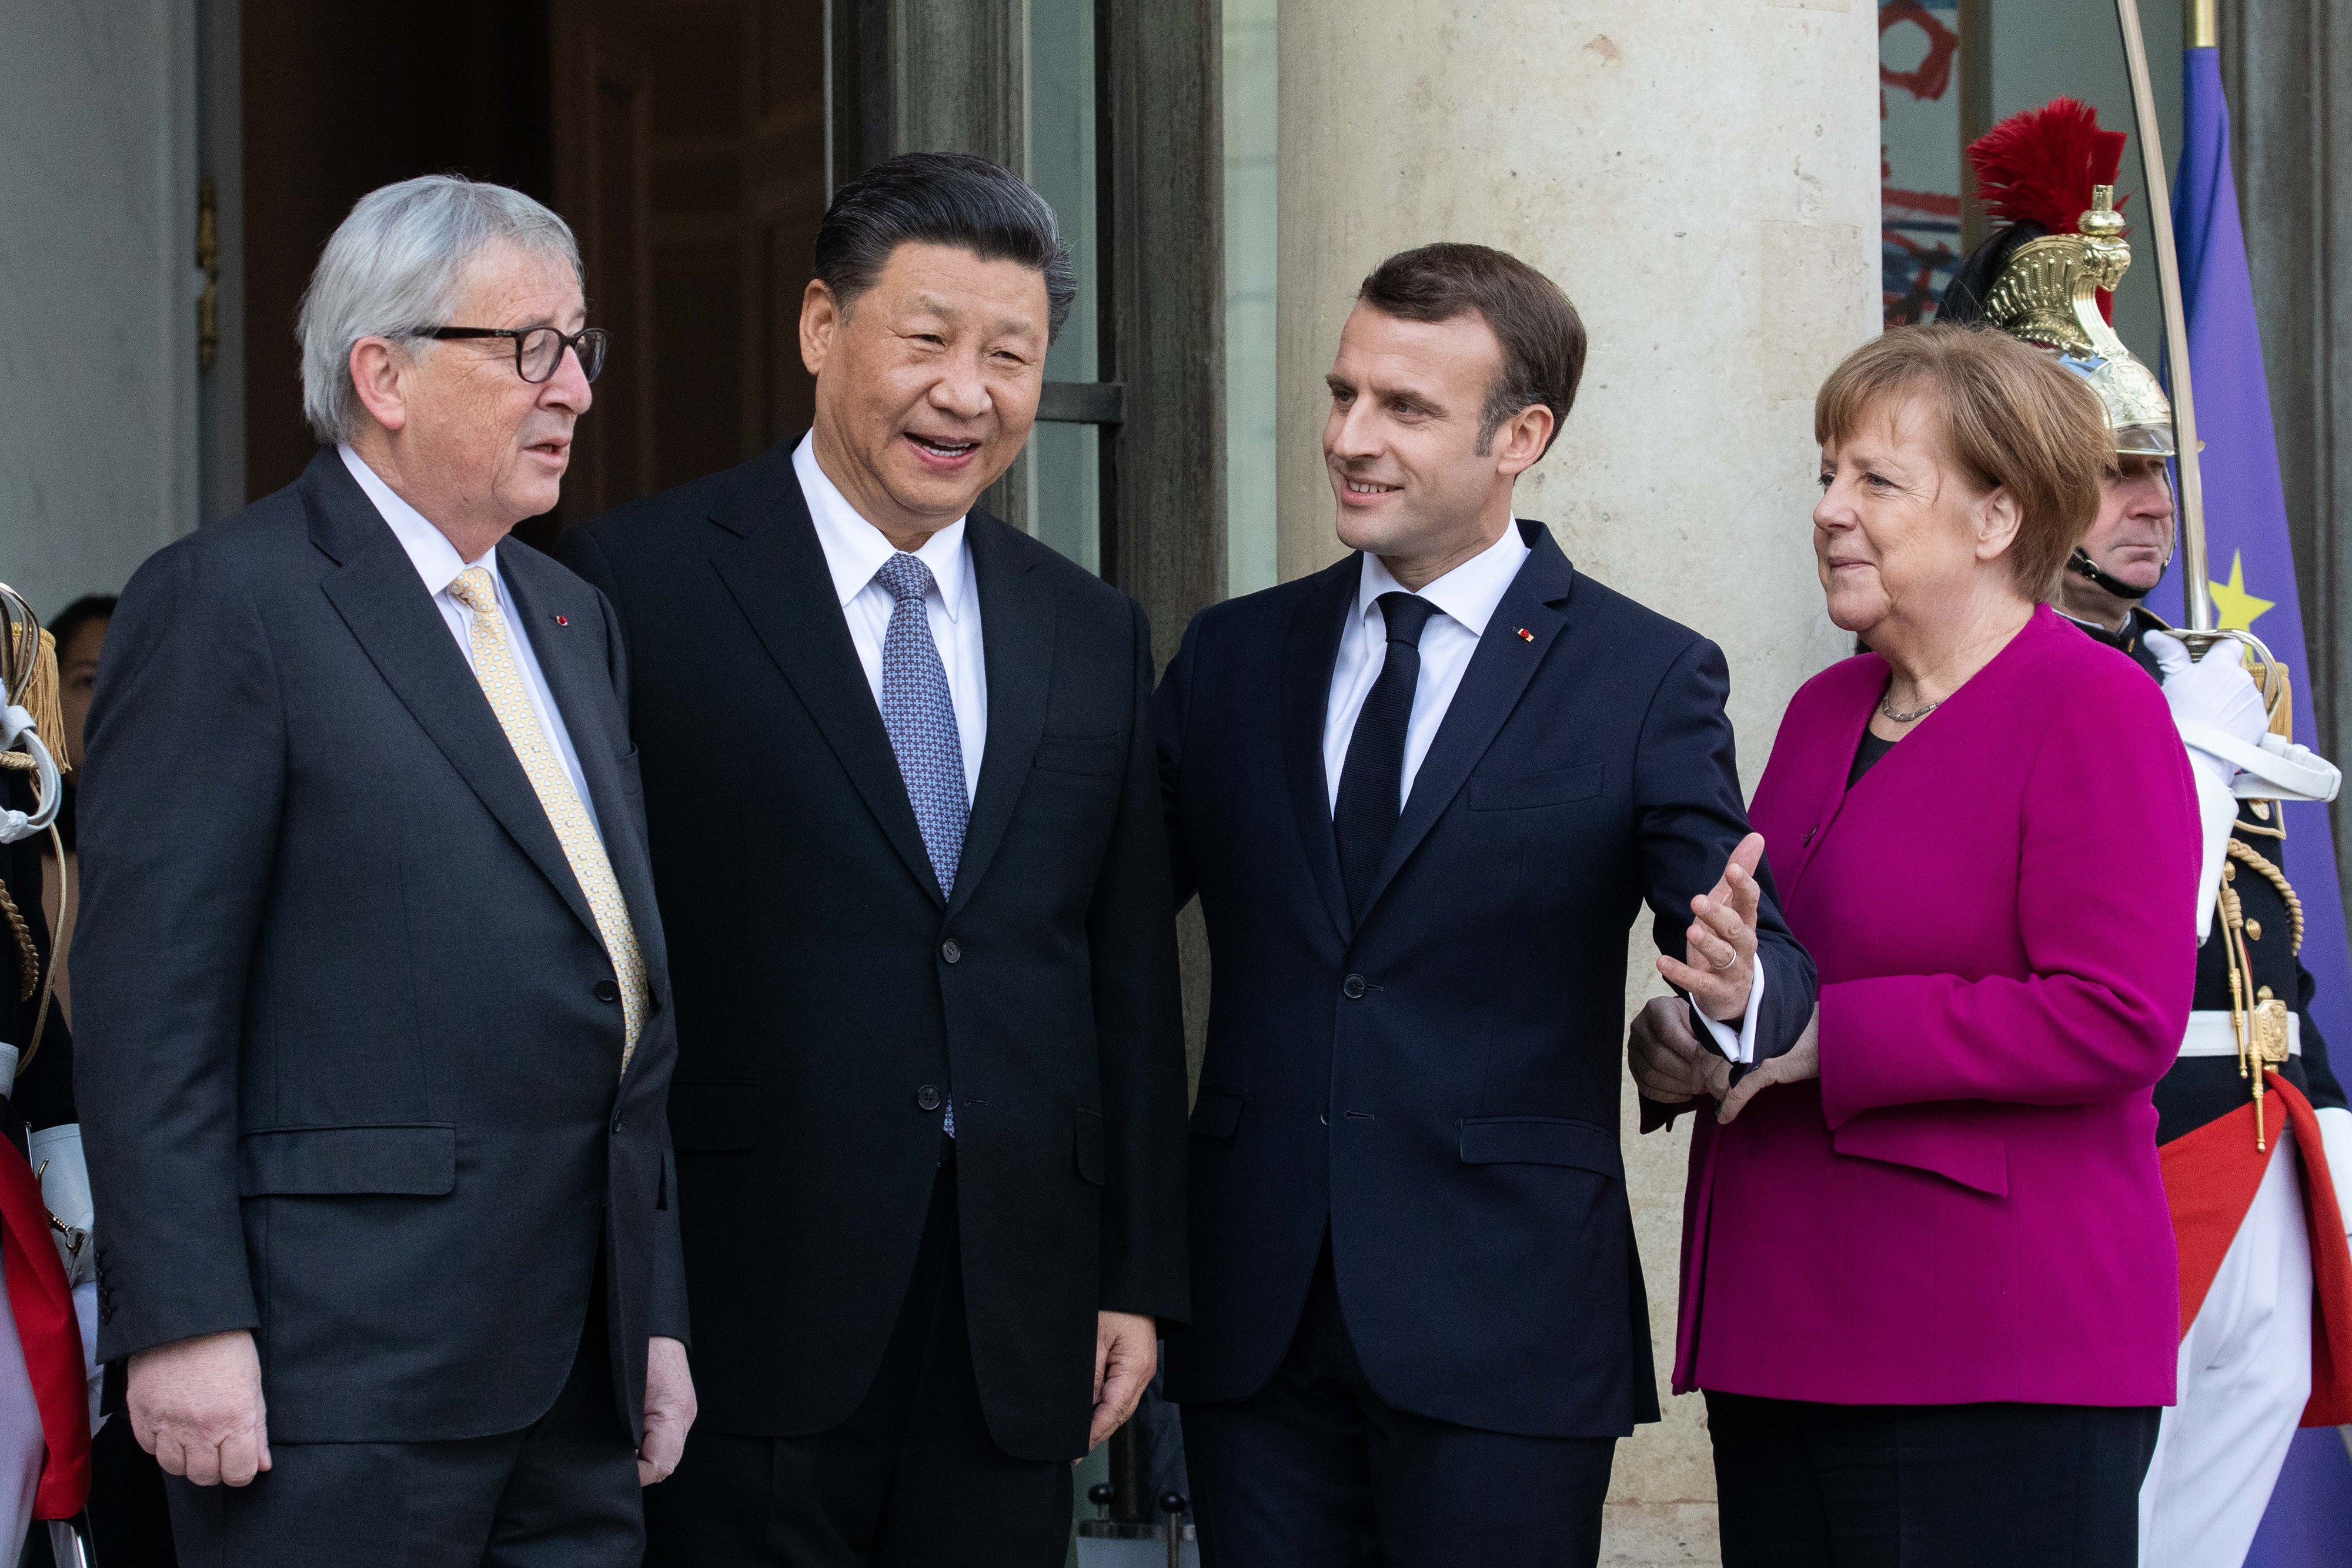 European Commission president Jean-Claude Juncker (left), Chinese President Xi Jinping, French President Emmanuel Macron and German Chancellor Angela Merkel gather in the courtyard of the Elysee Palace ahead of a meeting in Paris on March 26. Photo: Bloomberg